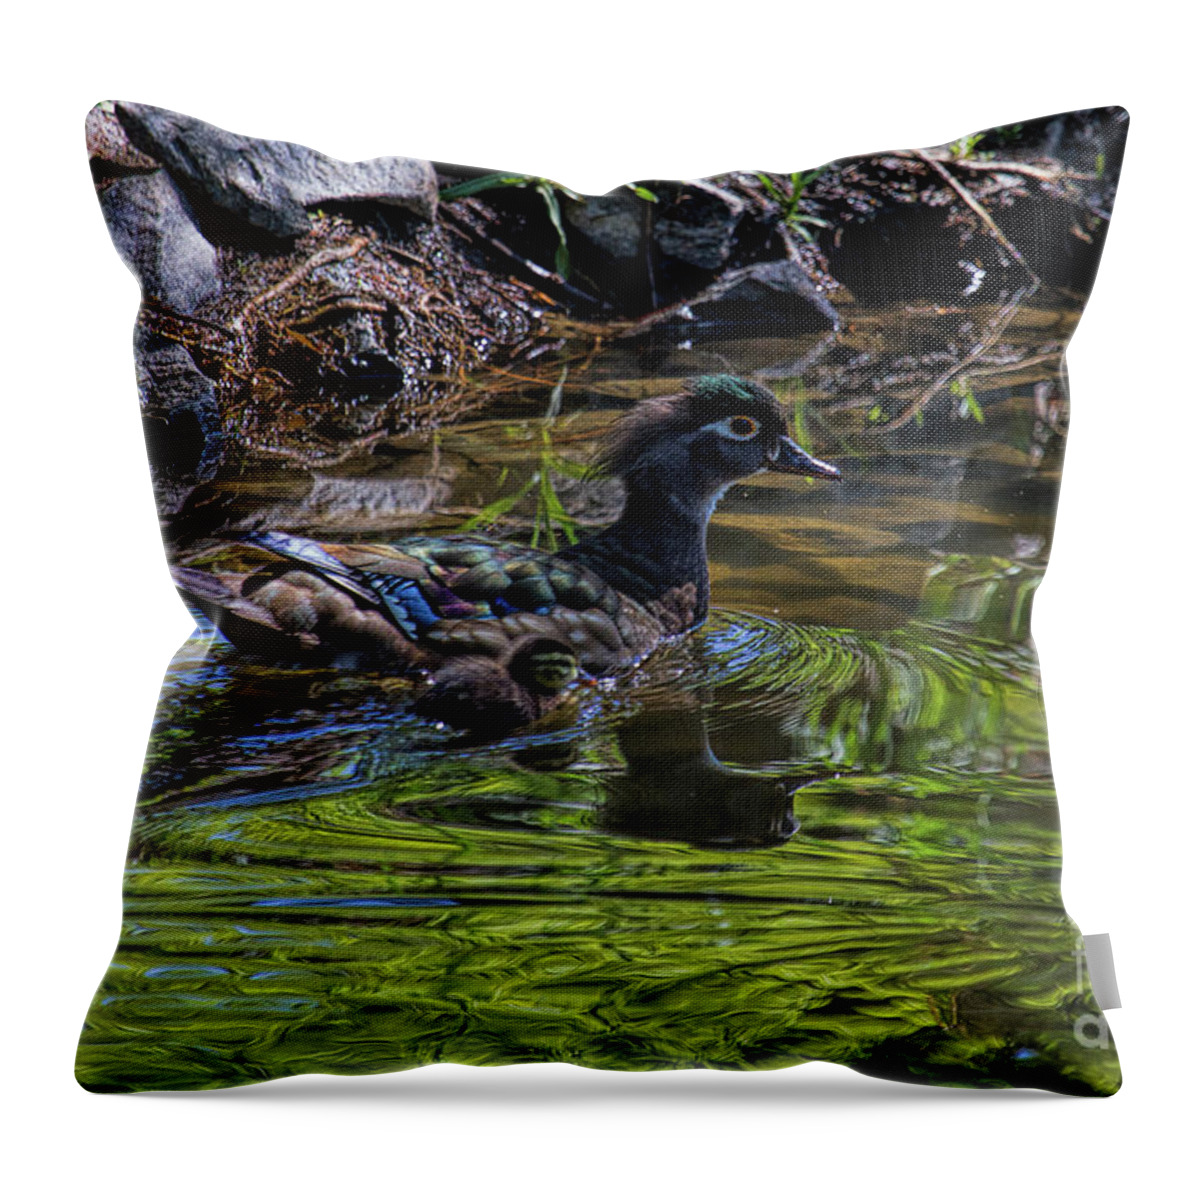 Wood Ducks Throw Pillow featuring the photograph The Emerald Aisle by Jim Garrison